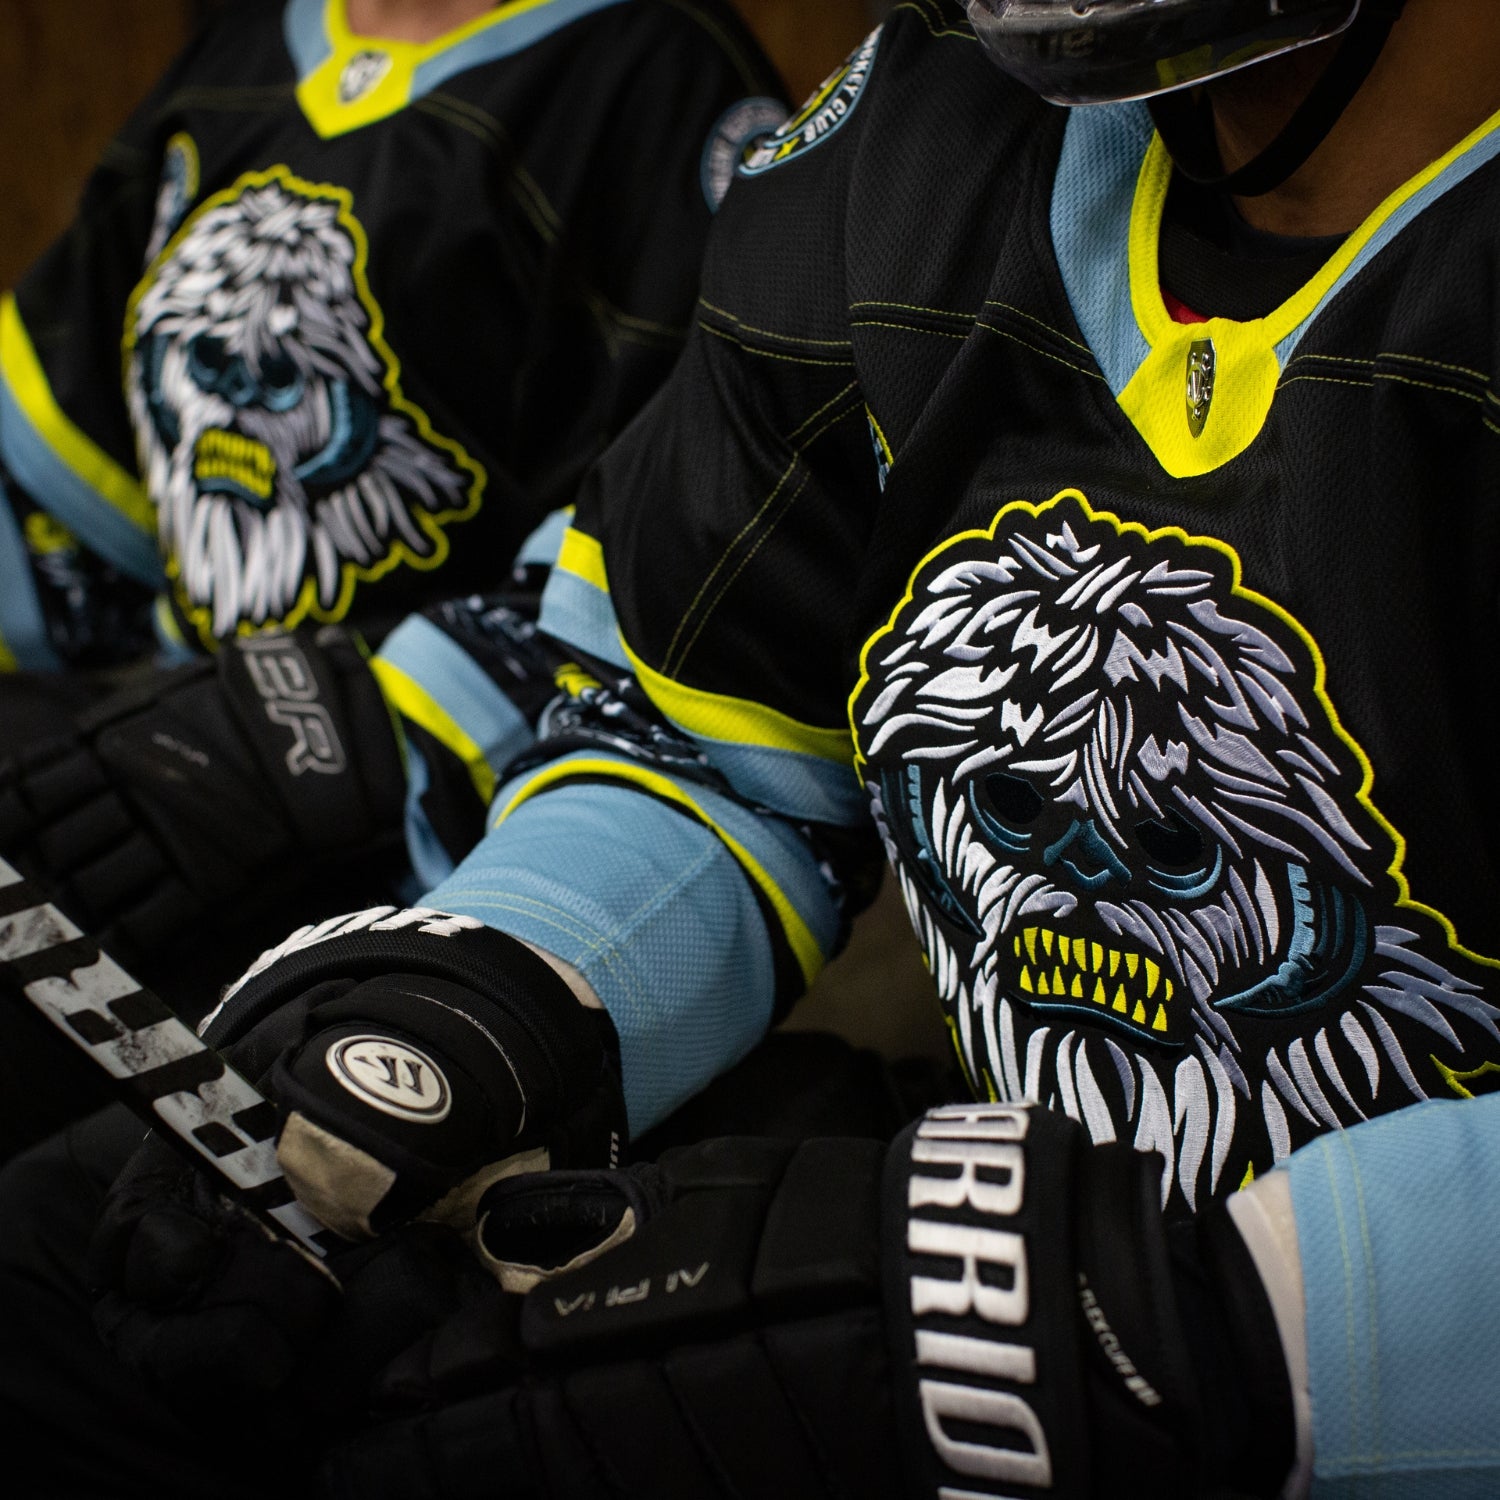 violent gentlemen hockey clothing company hockey club new star wars may the 4th releases - new Hoth hockey jersey, Hoth Star Wars Wampa t-shirt, tee, hoodie, and hockey socks. Learn more by checking out Orquest aedelweiss Hockey Apparel